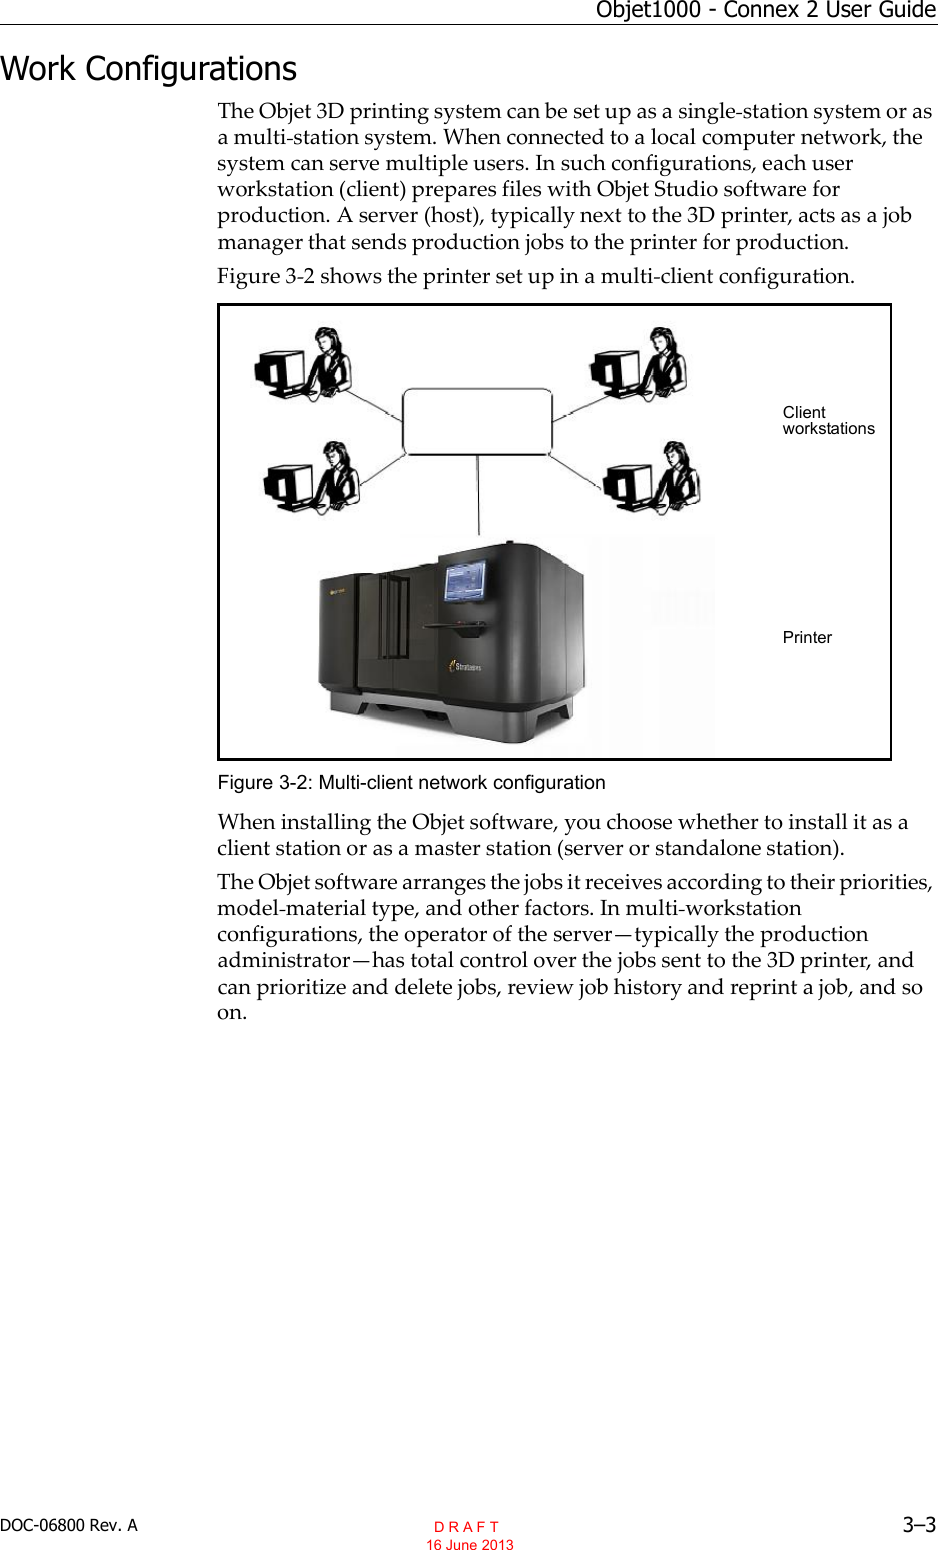 DOC-06800 Rev. A 3–3Objet1000 - Connex 2 User GuideWork ConfigurationsThe Objet 3D printing system can be set up as a single station system or asa multi station system. When connected to a local computer network, thesystem can serve multiple users. In such configurations, each userworkstation (client) prepares files with Objet Studio software forproduction. A server (host), typically next to the 3D printer, acts as a jobmanager that sends production jobs to the printer for production.Figure 3 2 shows the printer set up in a multi client configuration.Figure 3-2: Multi-client network configurationWhen installing the Objet software, you choose whether to install it as aclient station or as a master station (server or standalone station).The Objet software arranges the jobs it receives according to their priorities,model material type, and other factors. In multi workstationconfigurations, the operator of the servertypically the productionadministratorhas total control over the jobs sent to the 3D printer, andcan prioritize and delete jobs, review job history and reprint a job, and soon.ClientworkstationsPrinter  D R A F T 16 June 2013